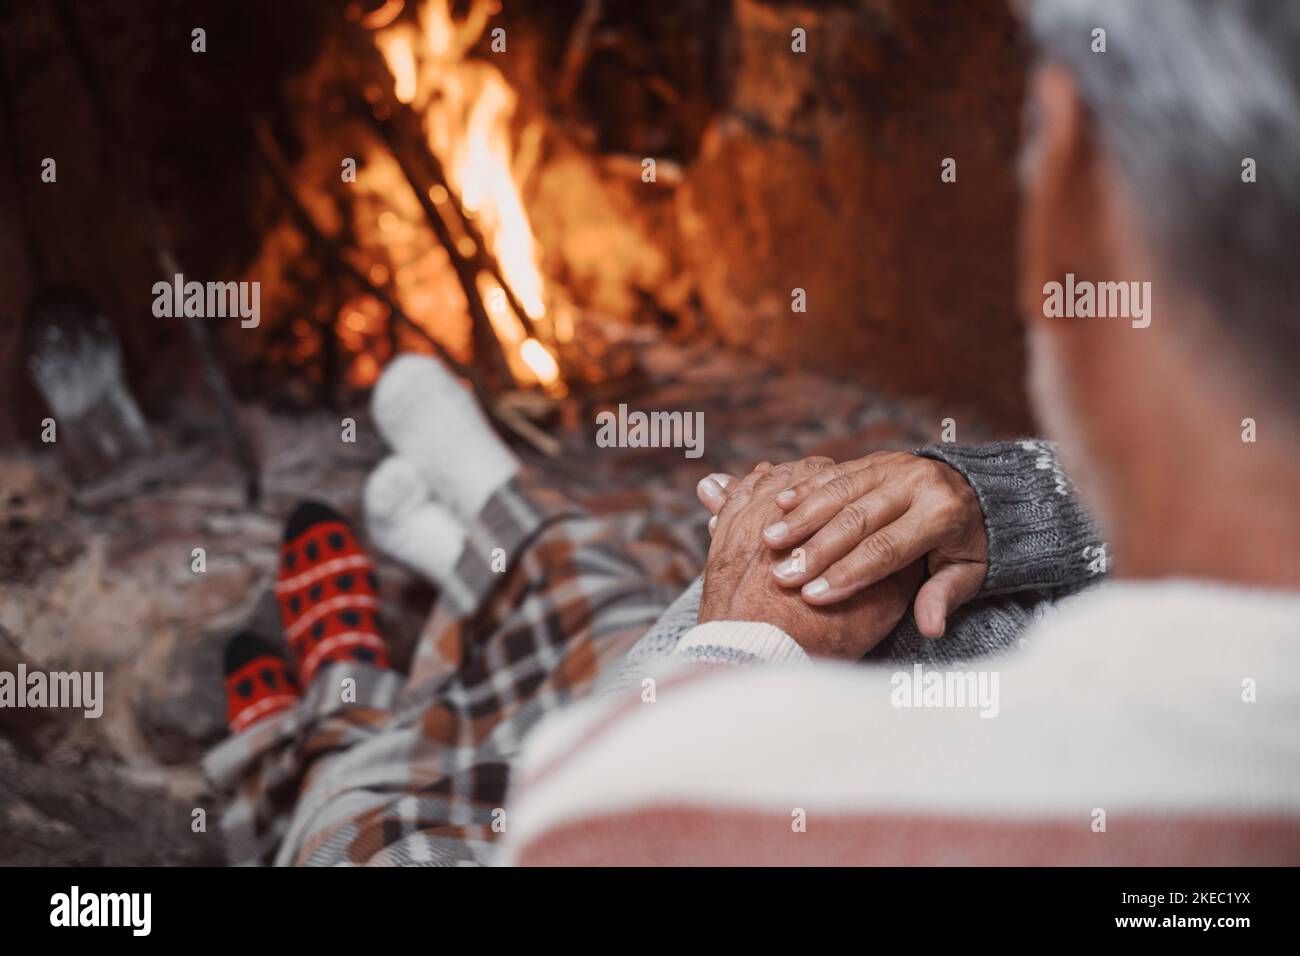 Old caucasian couple spending leisure time together at home. Loving romantic husband and wife relaxing while holding hands in front of burning fireplace during winter christmas holiday Stock Photo